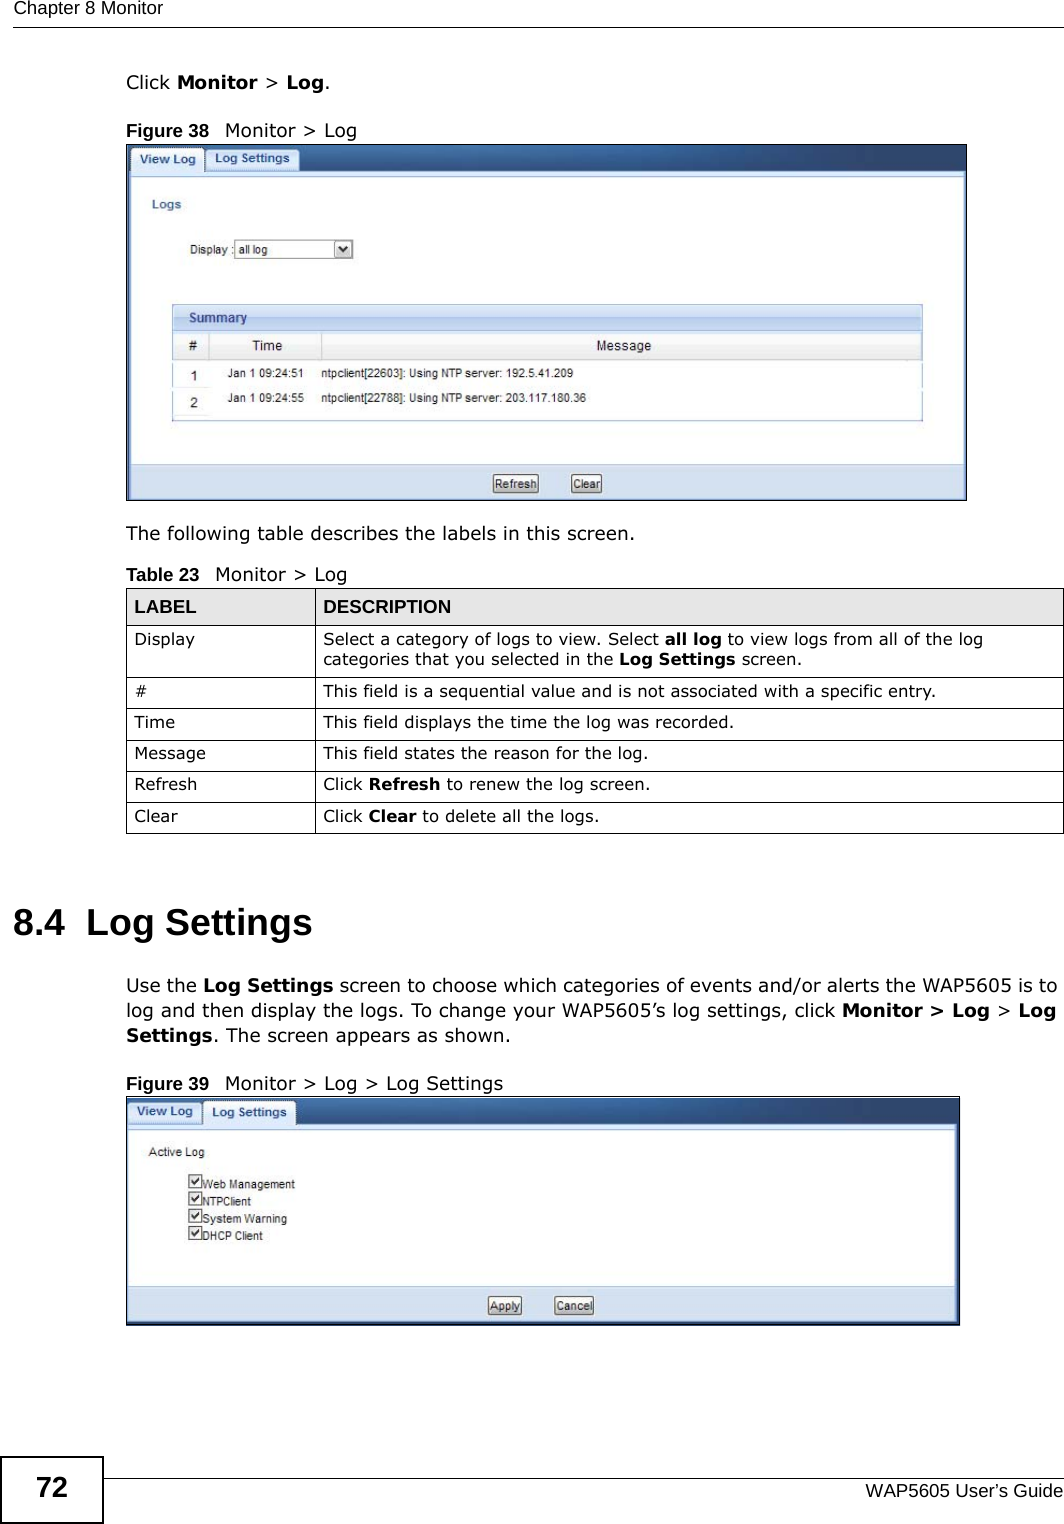 Chapter 8 MonitorWAP5605 User’s Guide72Click Monitor &gt; Log.Figure 38   Monitor &gt; Log The following table describes the labels in this screen. 8.4  Log Settings Use the Log Settings screen to choose which categories of events and/or alerts the WAP5605 is to log and then display the logs. To change your WAP5605’s log settings, click Monitor &gt; Log &gt; Log Settings. The screen appears as shown.Figure 39   Monitor &gt; Log &gt; Log SettingsTable 23   Monitor &gt; LogLABEL DESCRIPTIONDisplay  Select a category of logs to view. Select all log to view logs from all of the log categories that you selected in the Log Settings screen.#This field is a sequential value and is not associated with a specific entry.Time  This field displays the time the log was recorded. Message This field states the reason for the log.Refresh Click Refresh to renew the log screen. Clear Click Clear to delete all the logs. 